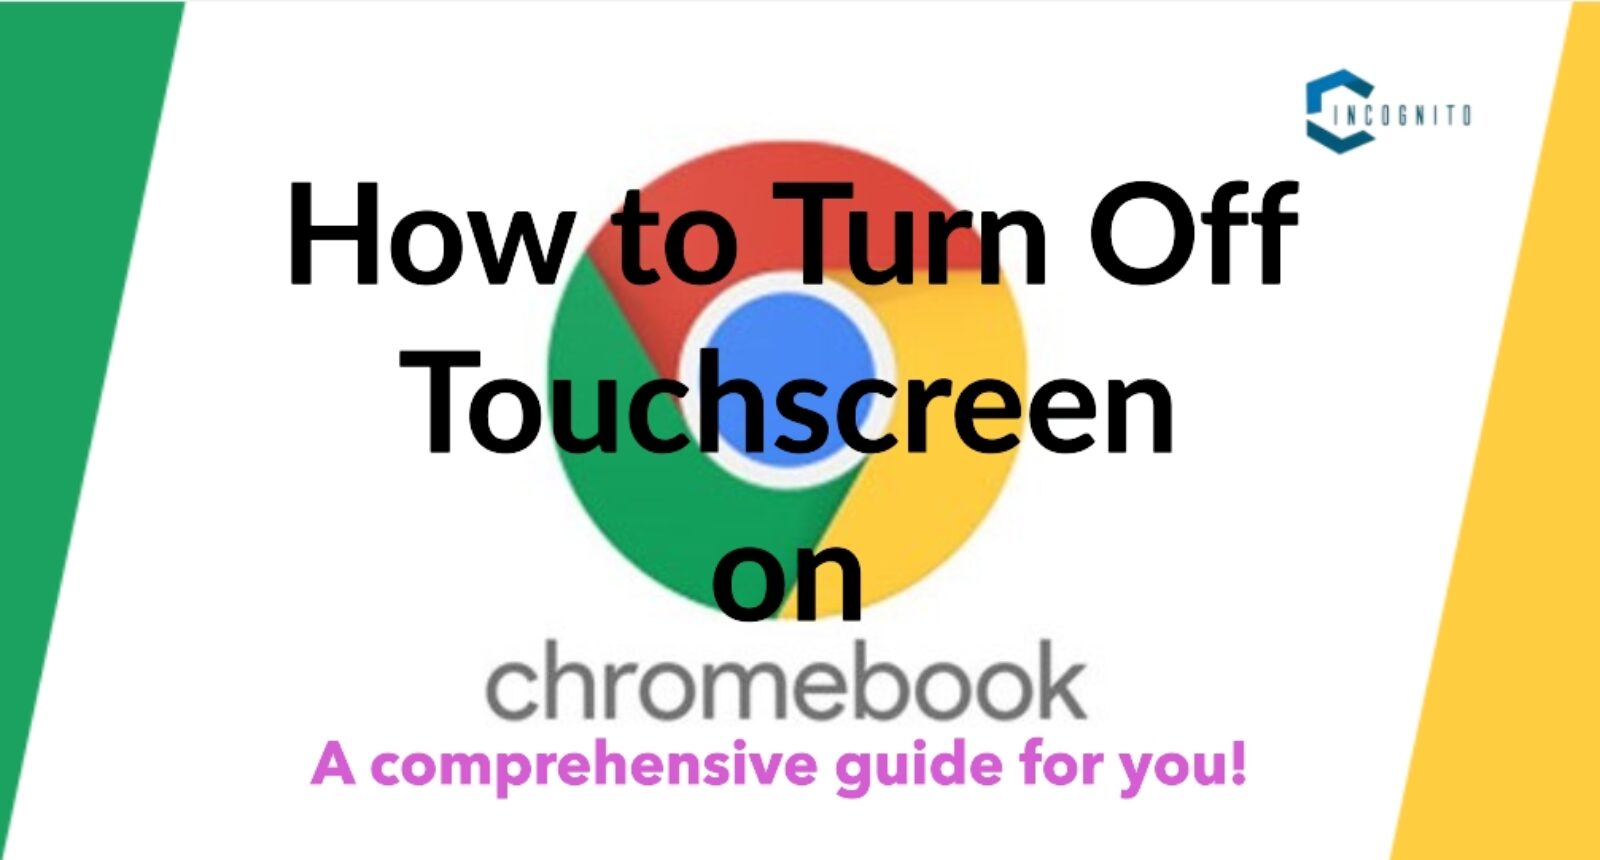 How to Turn Off Touchscreen on Chromebook: A Comprehensive Guide for You!